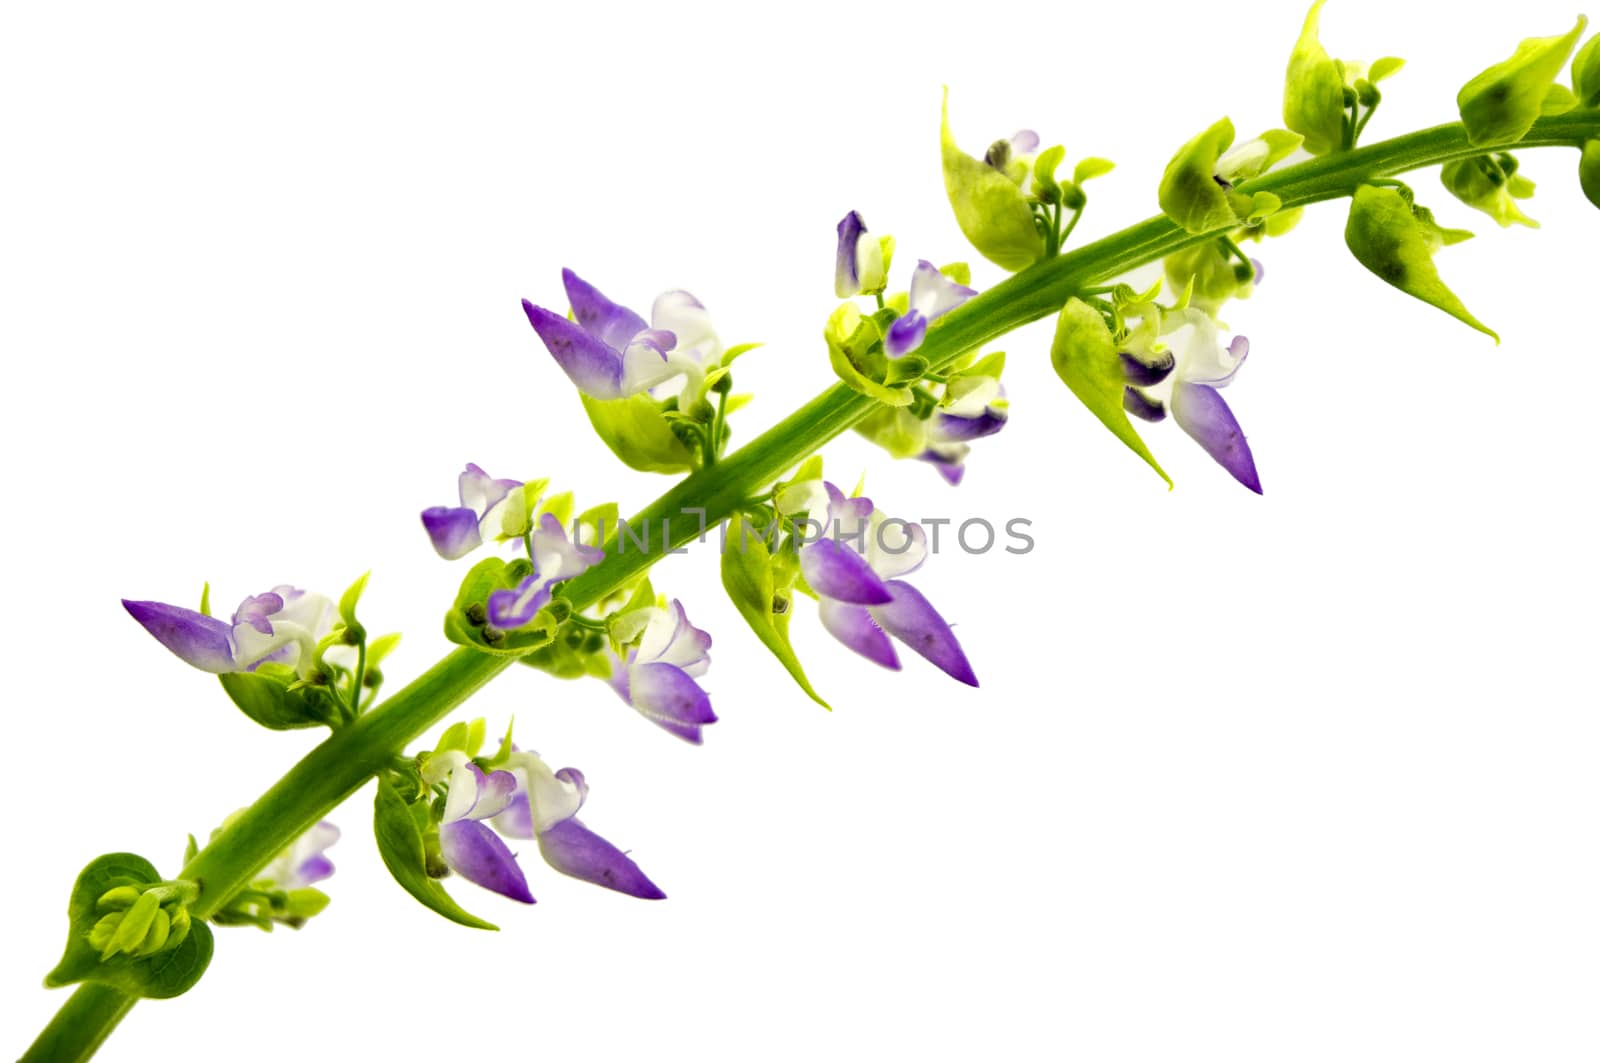 Coleus flowers isolated on white background. For your commercial and editorial use. by serhii_lohvyniuk